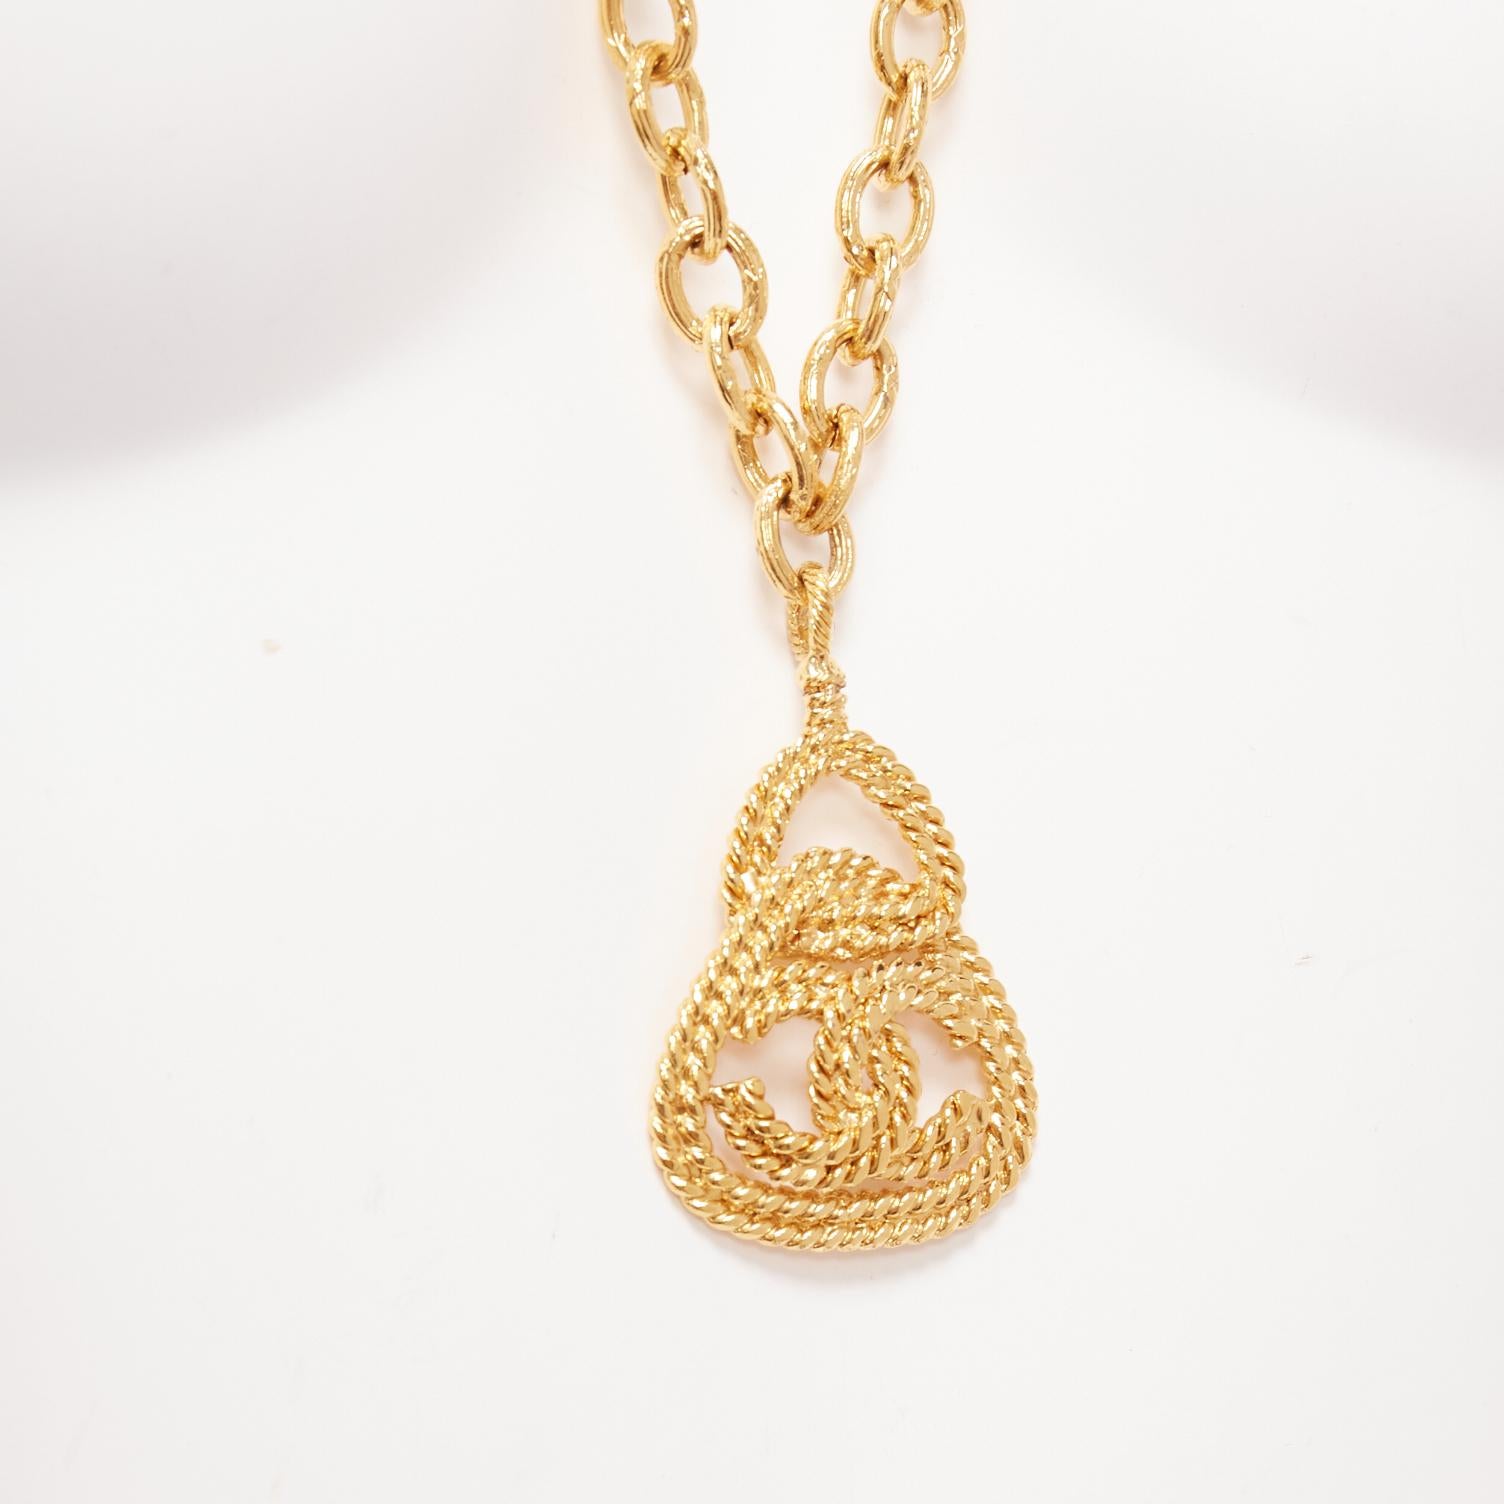 CHANEL 93A Vintage gold tone CC logo pendent chain long necklace
Reference: TGAS/D01072
Brand: Chanel
Designer: Karl Lagerfeld
Collection: 93A
Material: Metal
Color: Gold
Pattern: Solid
Closure: Push Clasp
Lining: Gold Metal
Made in: